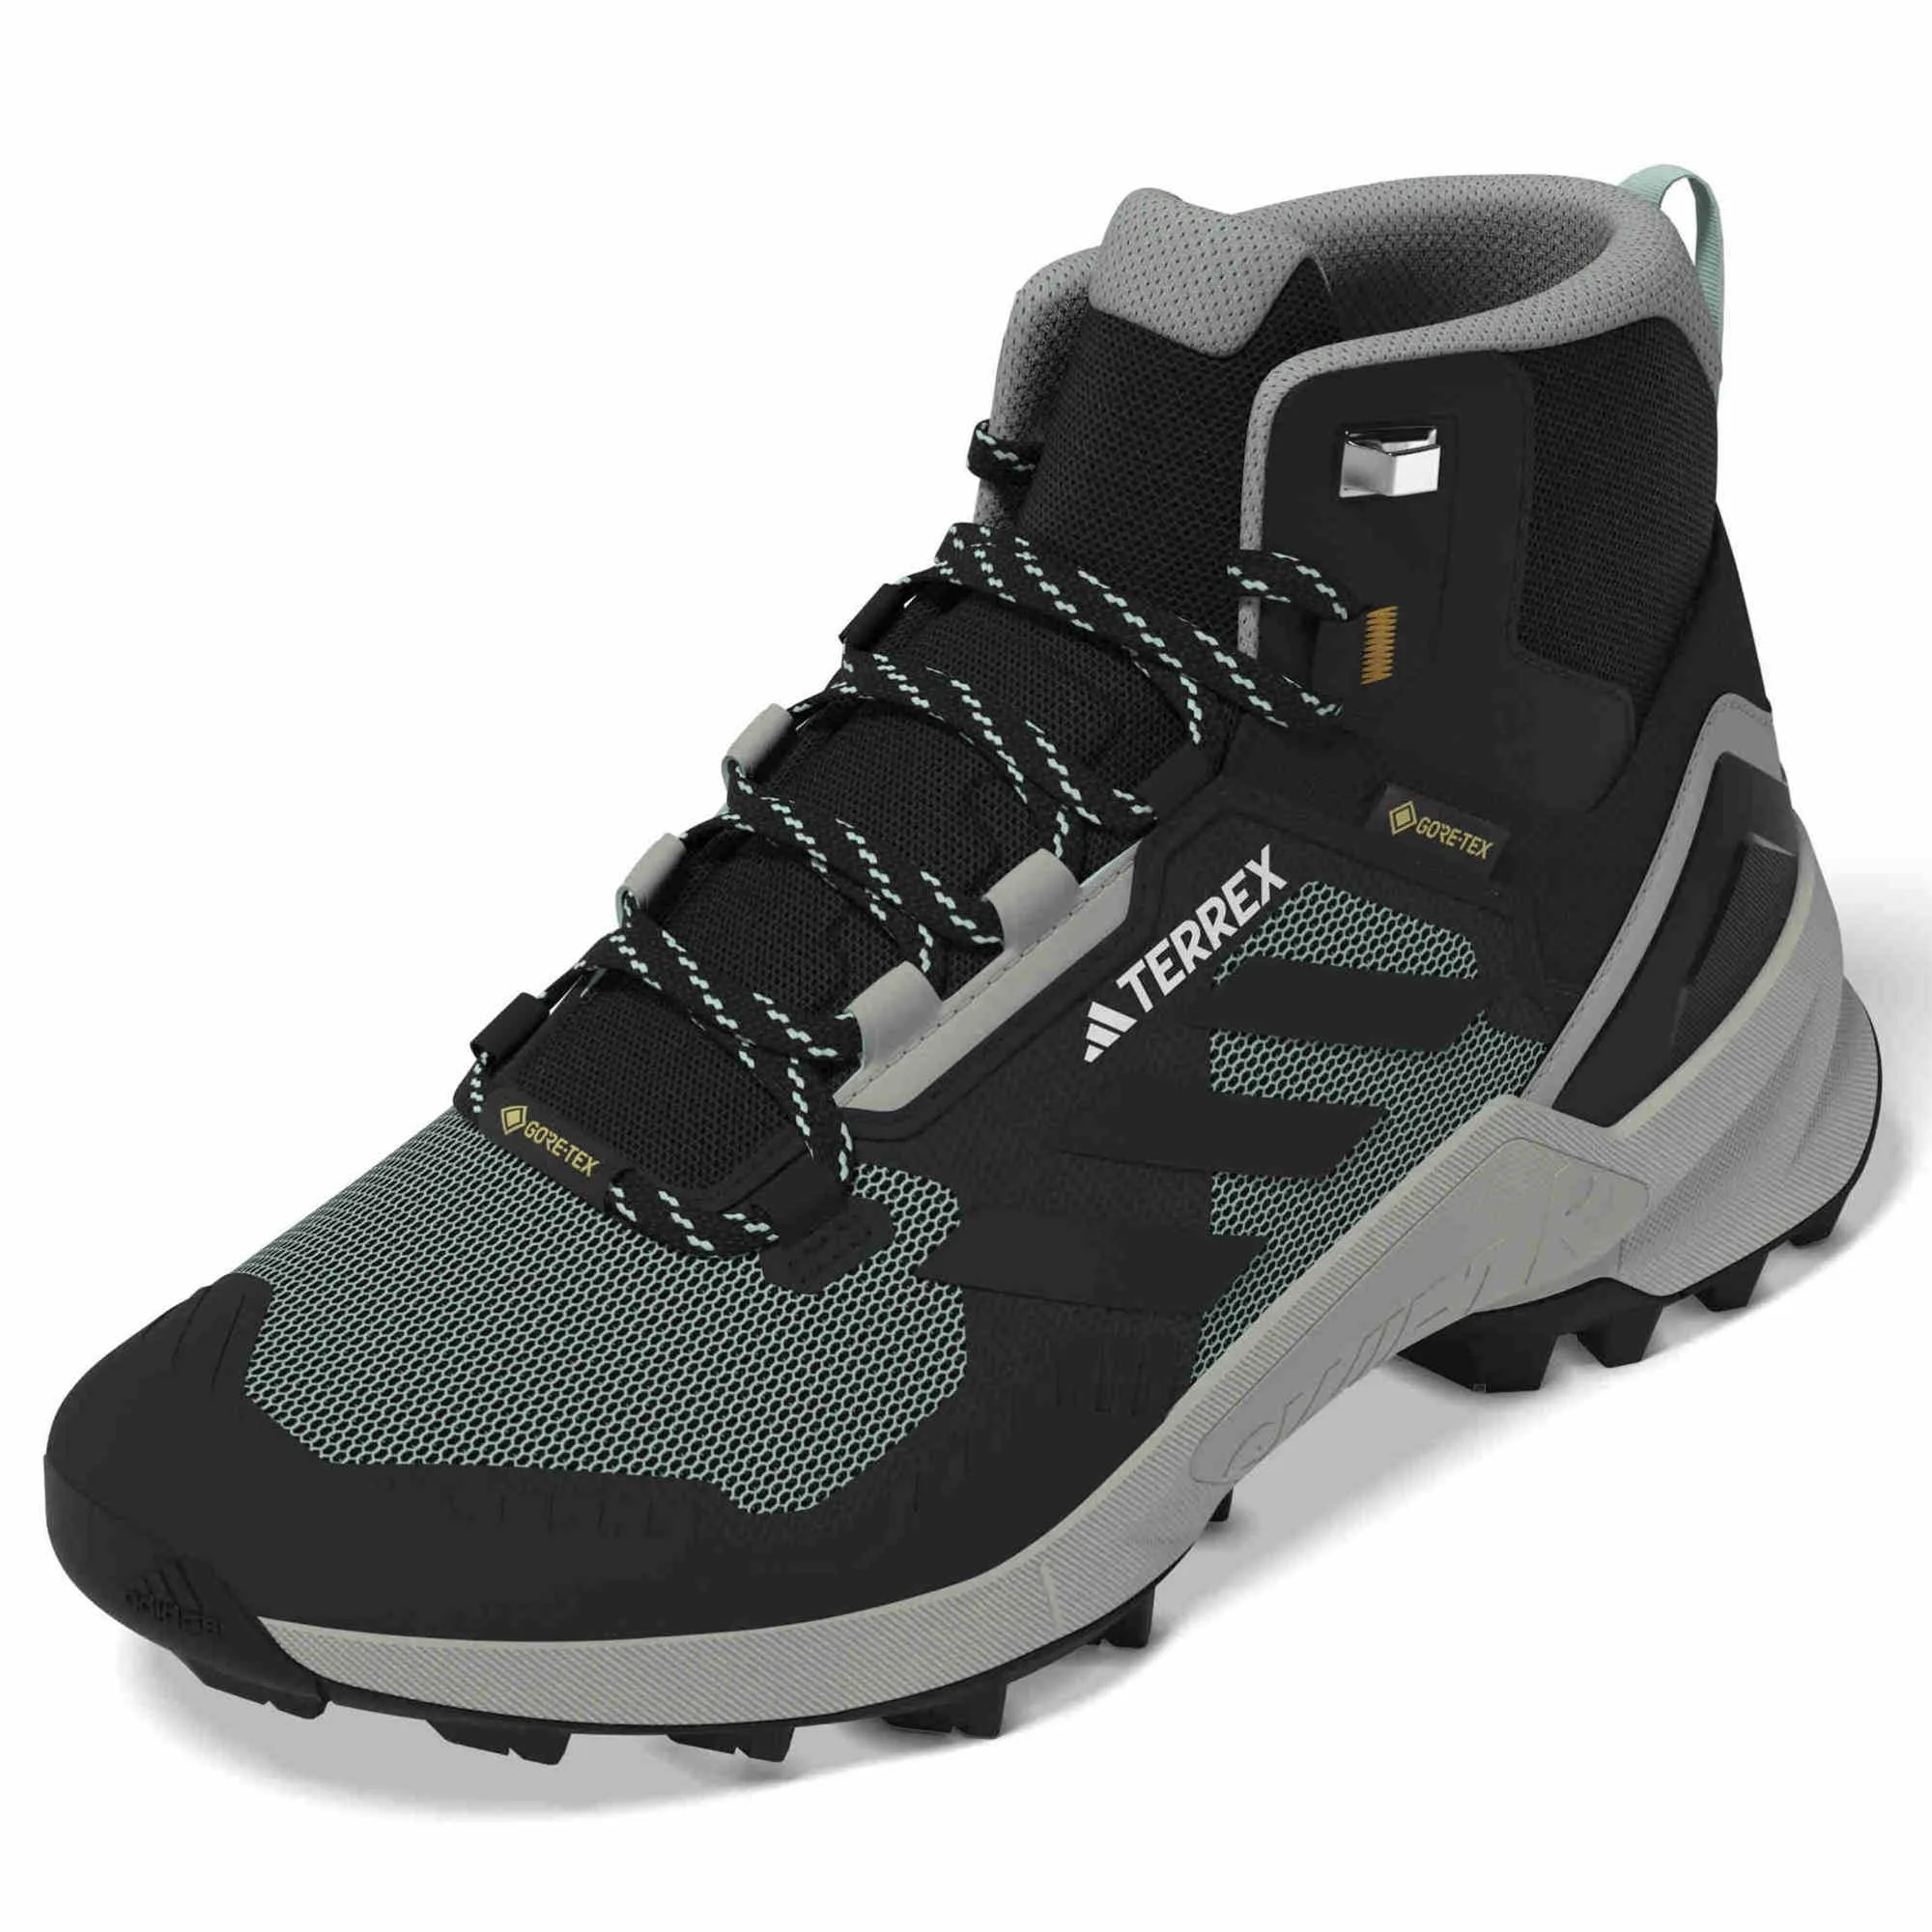 IF2401_13_FOOTWEAR_3D - Rendering_Side Lateral Left View_transparent.jpg